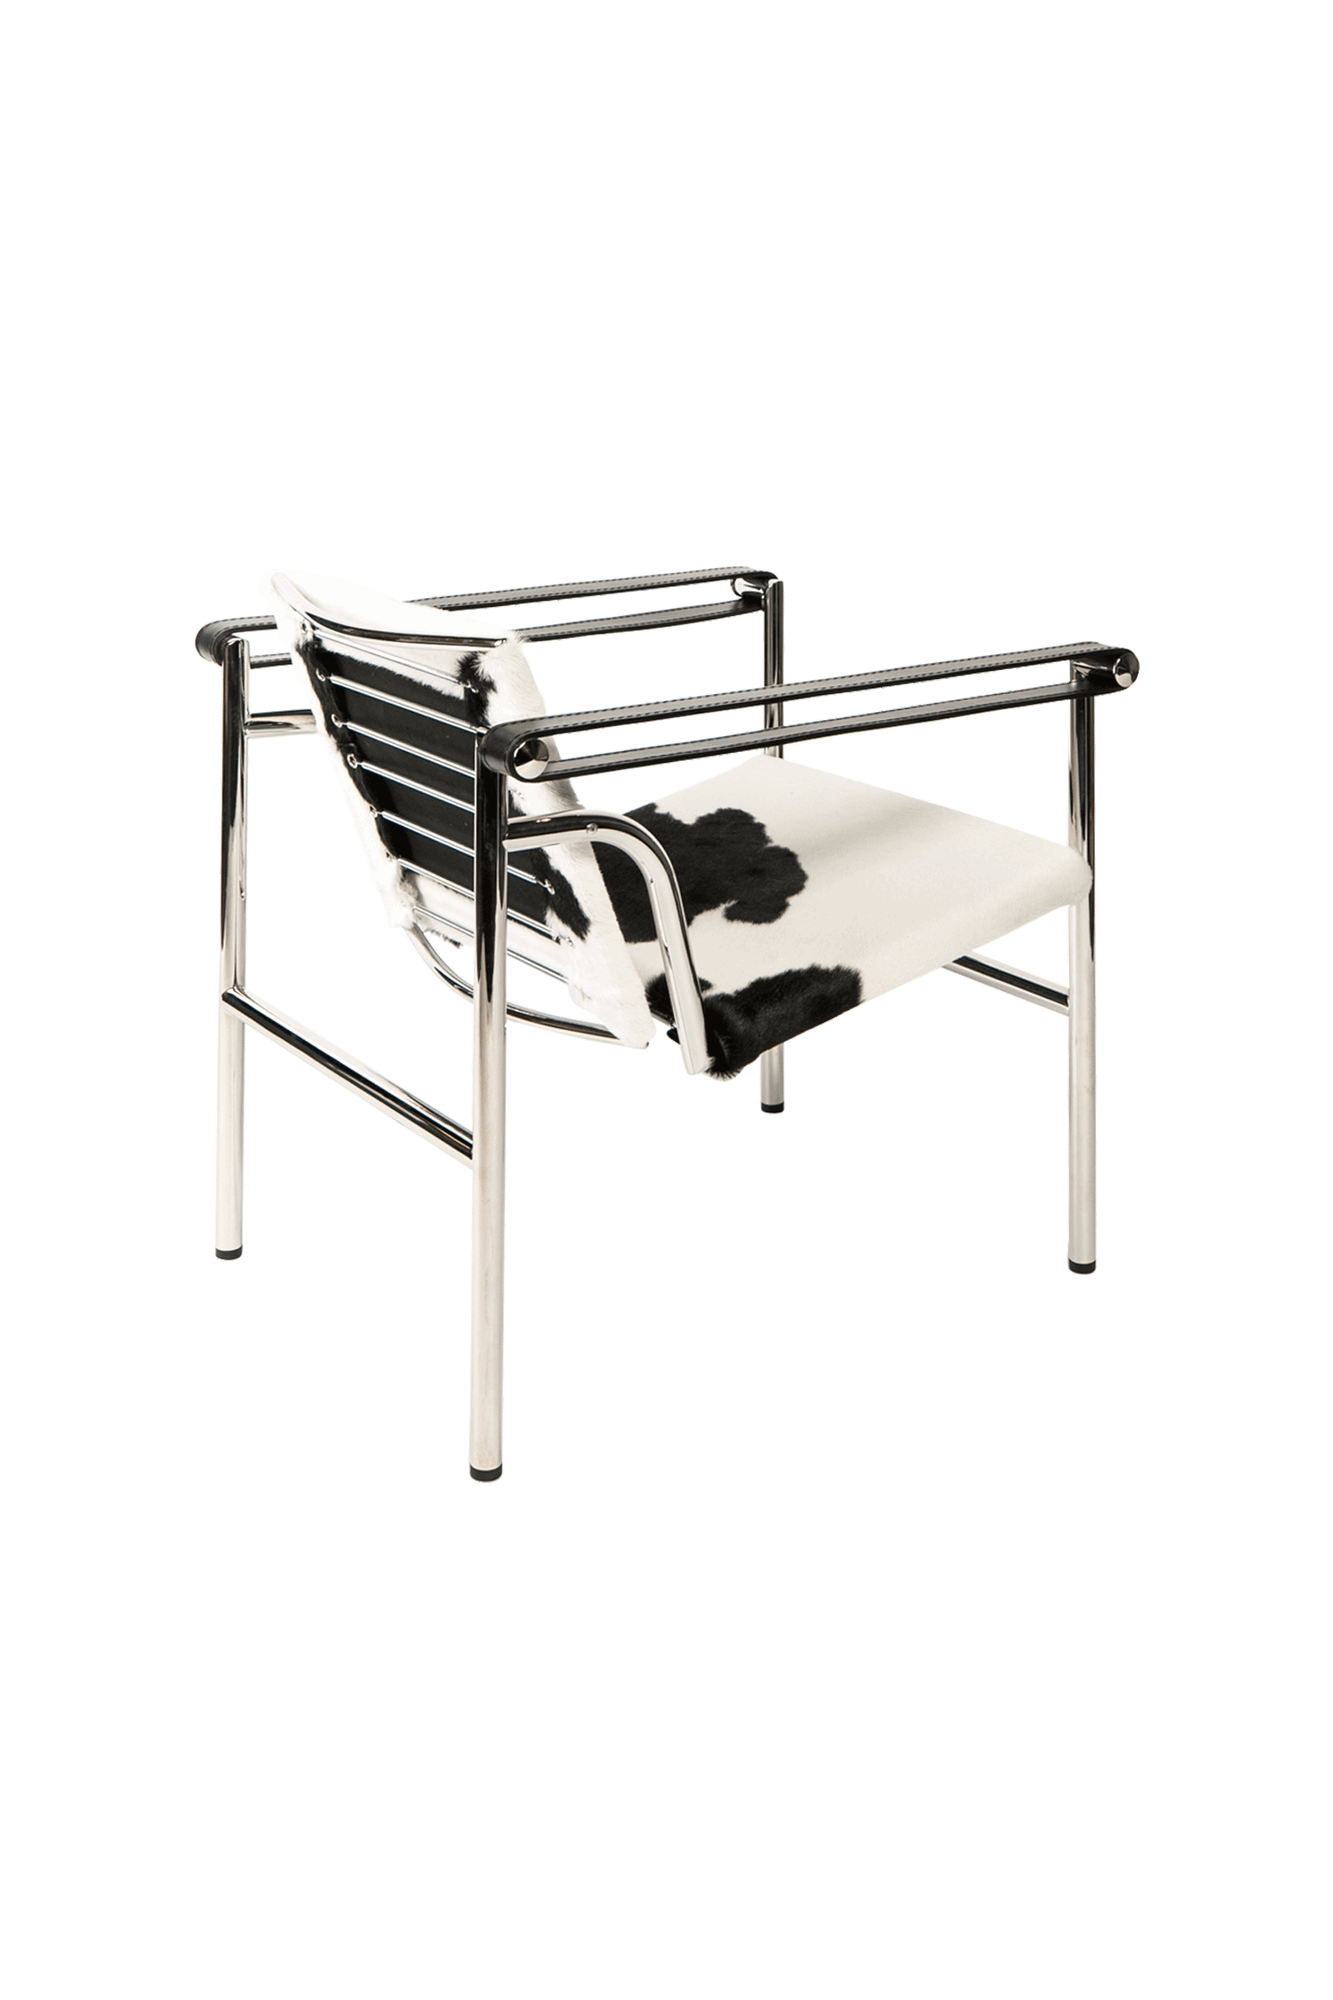 1 Fauteuil Dossier Basculant by Le Corbusier, P. Jeanneret, C. Perriand